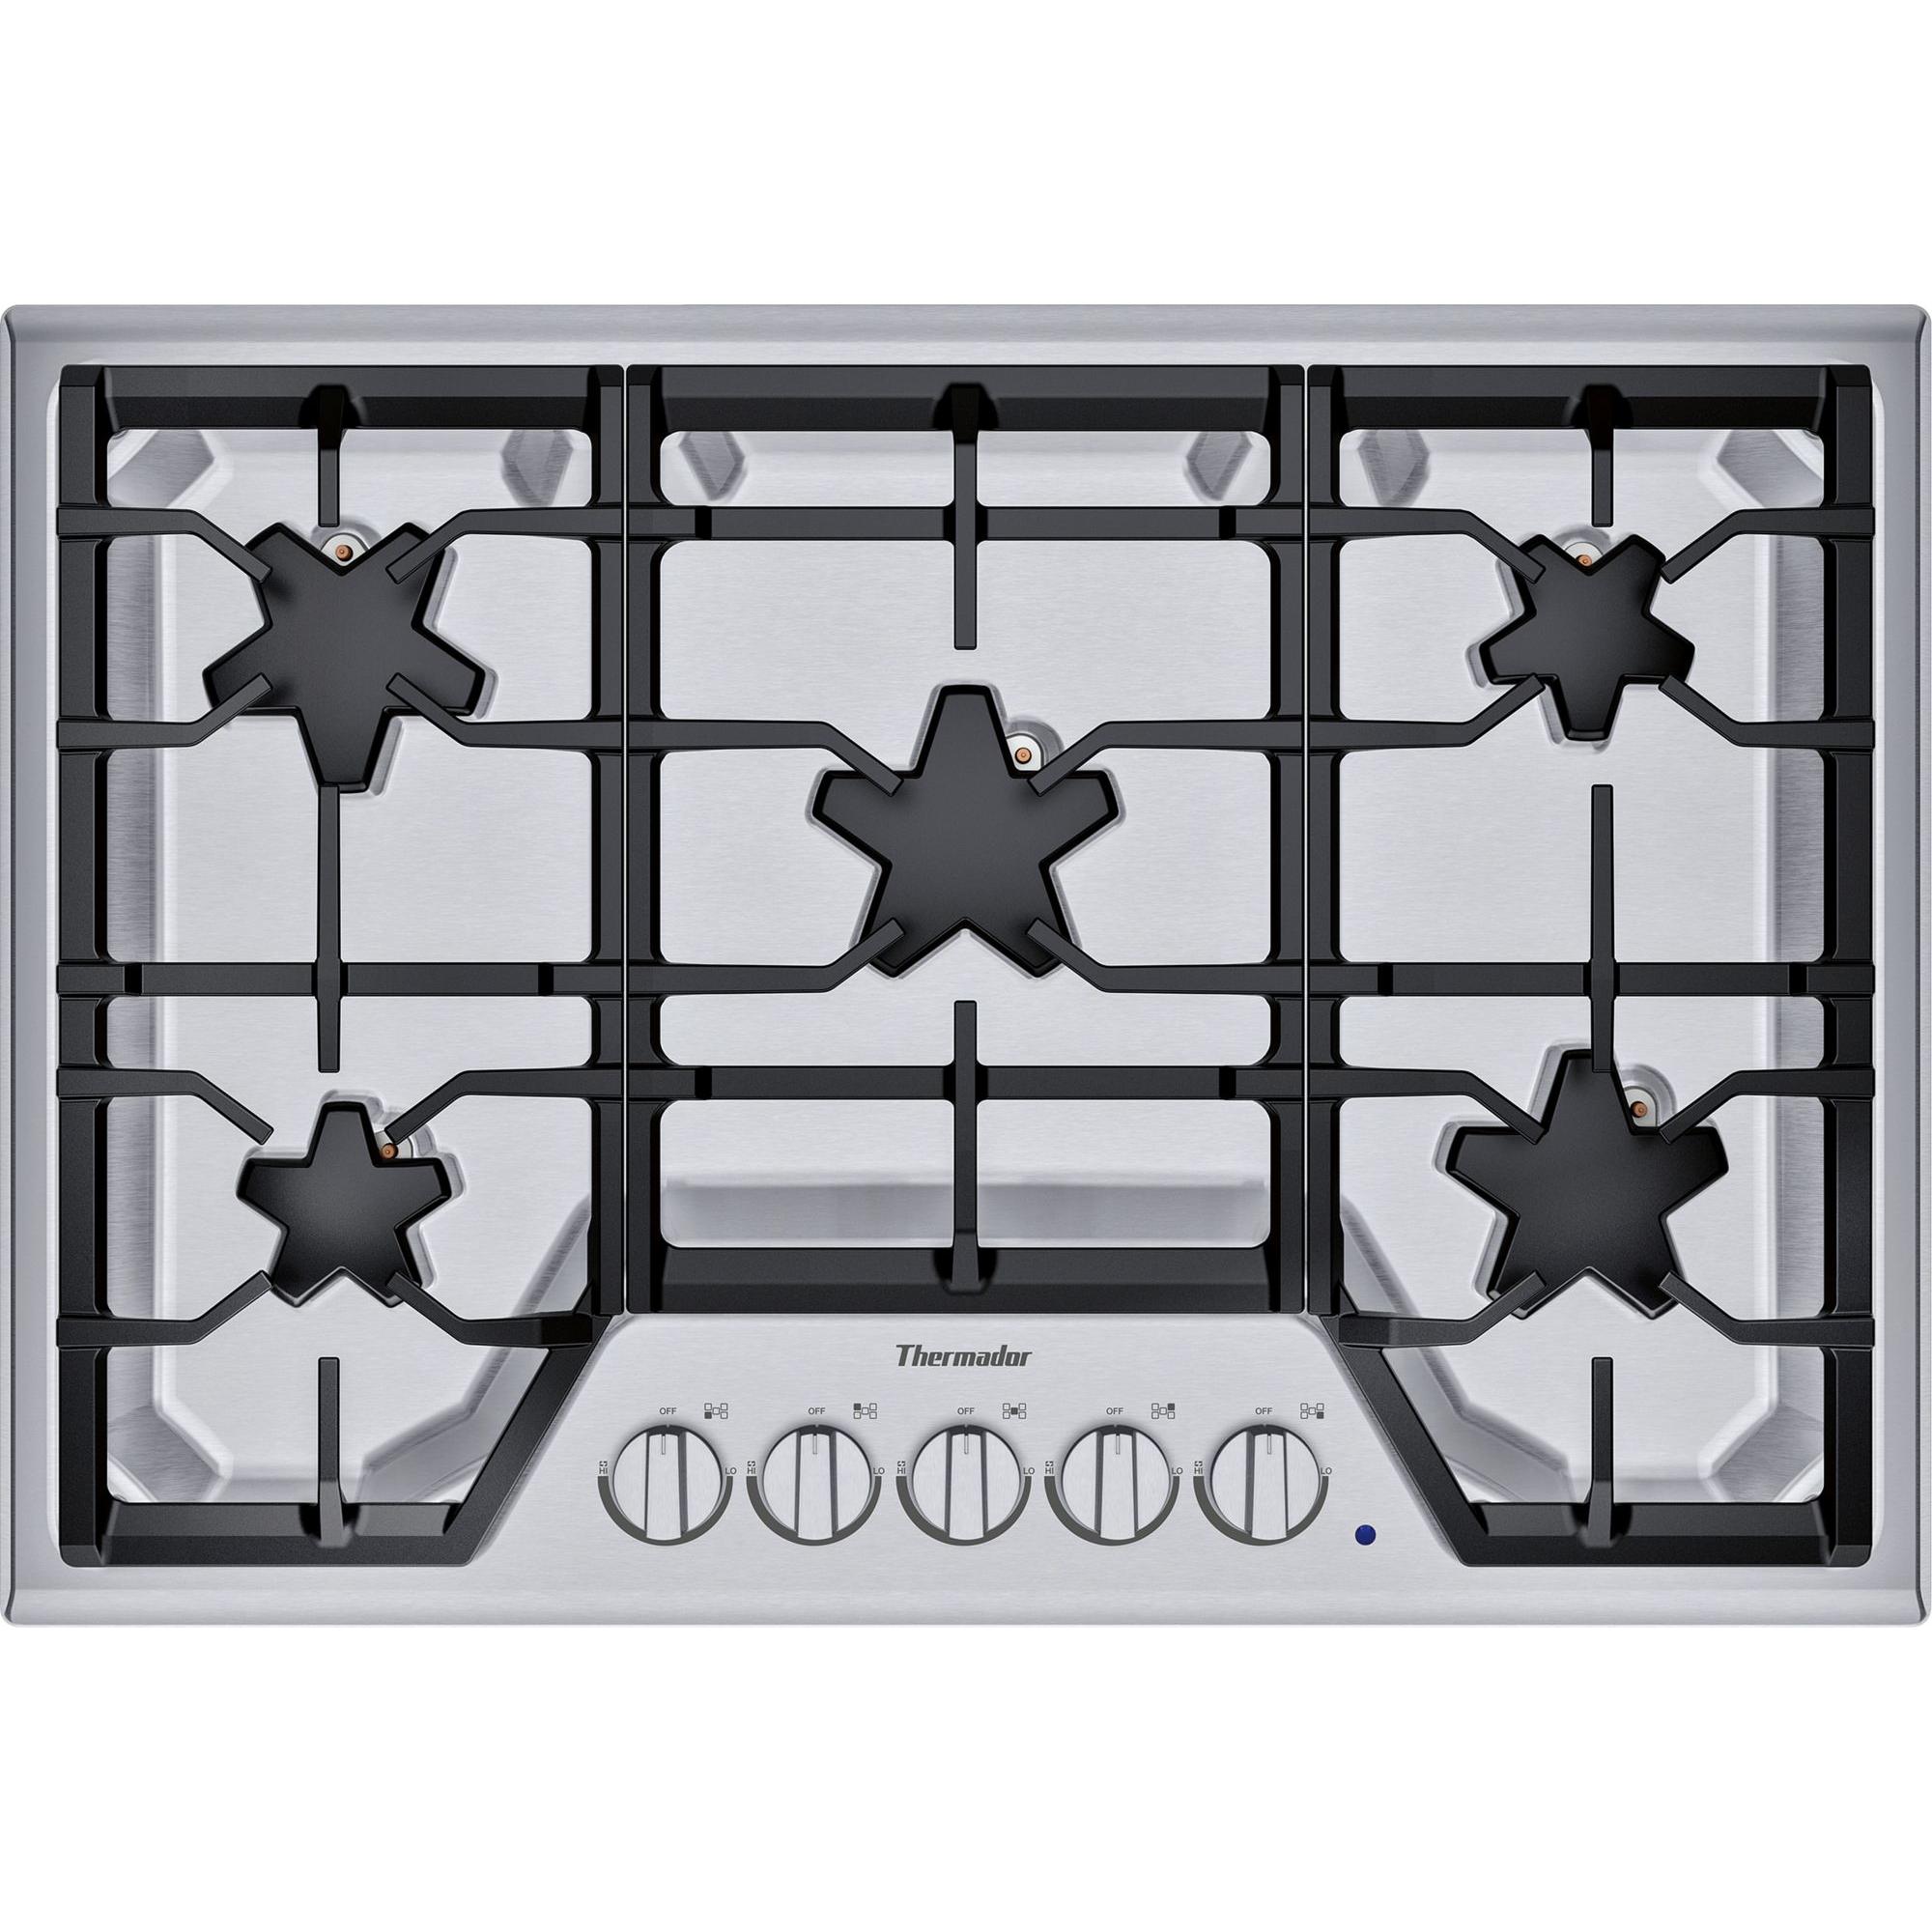 Thermador 30-inch Built-in Gas Cooktop with Patented Star? Burners SGS305TS